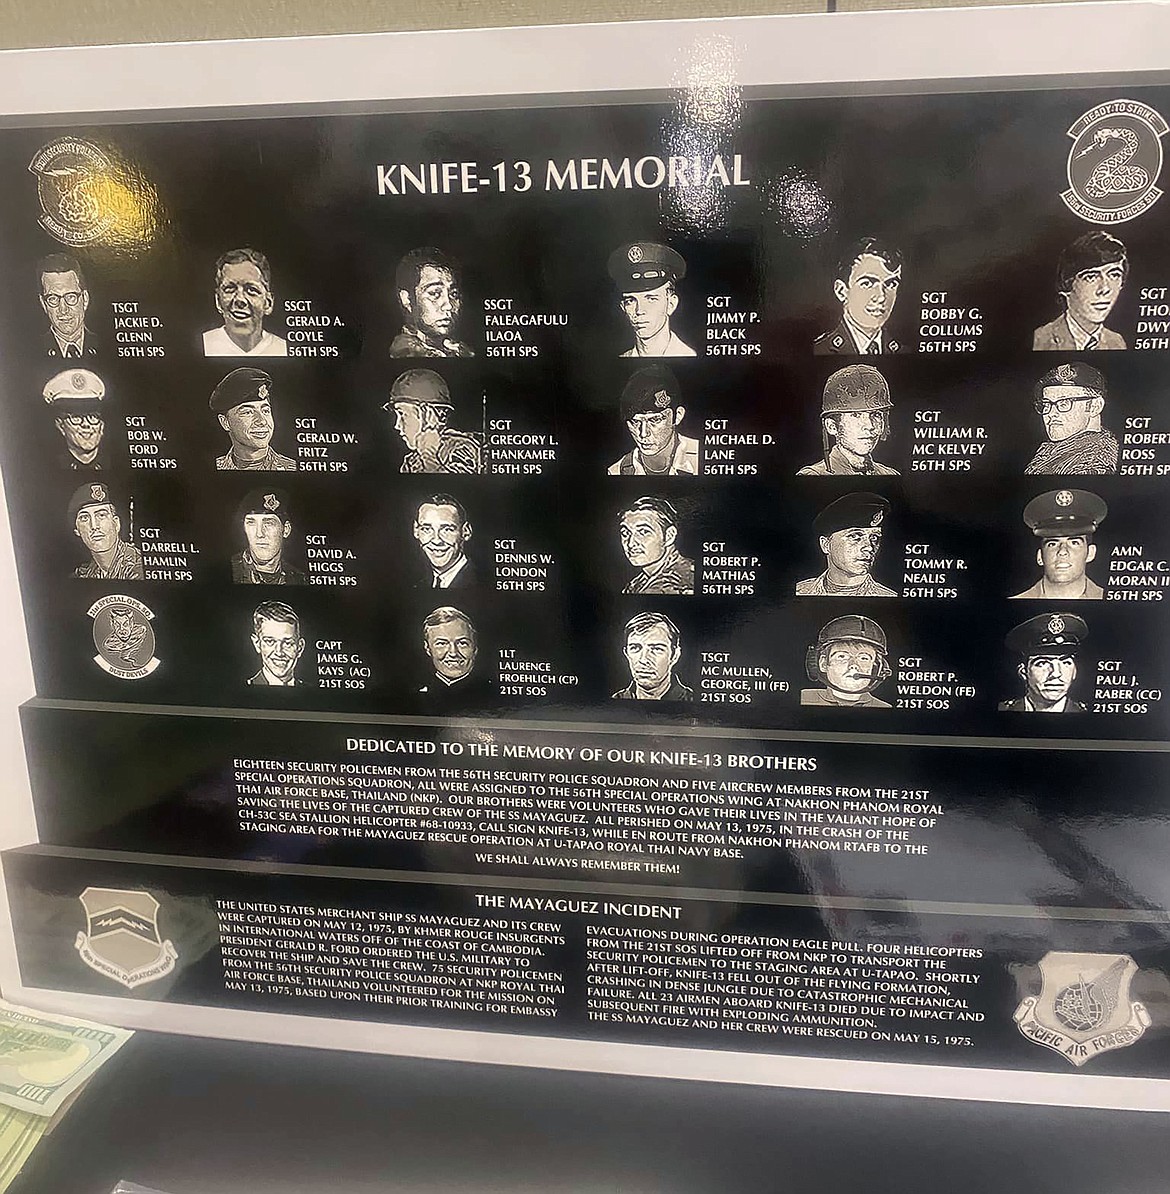 A photo of the Knife-13 Memorial showing the men lost when the Knife 13. crashed on May 13, 1975, en route to a rescue mission.